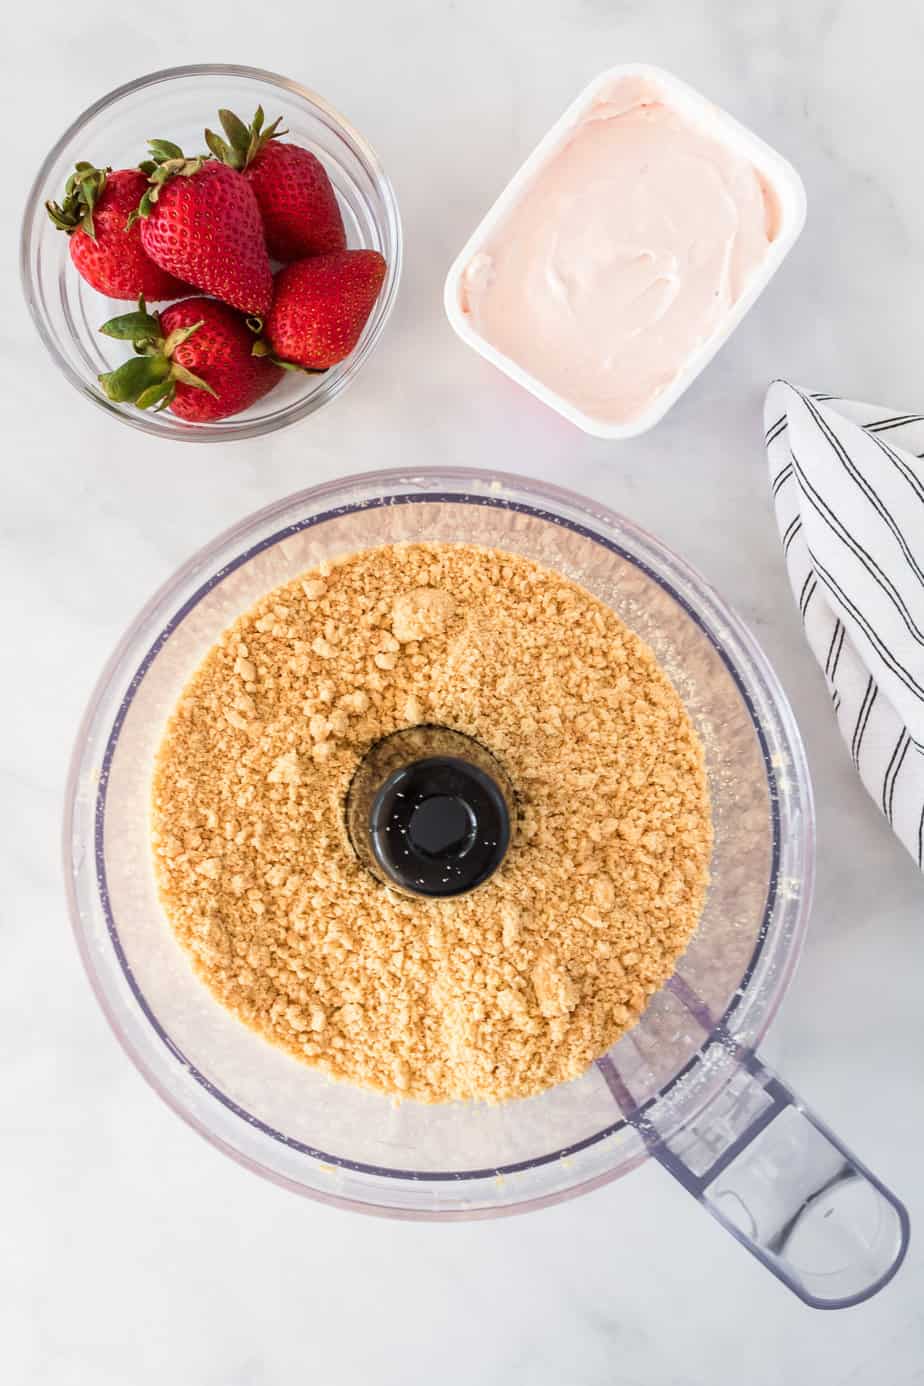 Golden Oreos in a food processor bowl with strawberry cream cheese and strawberries in a bowl nearby on the counter.